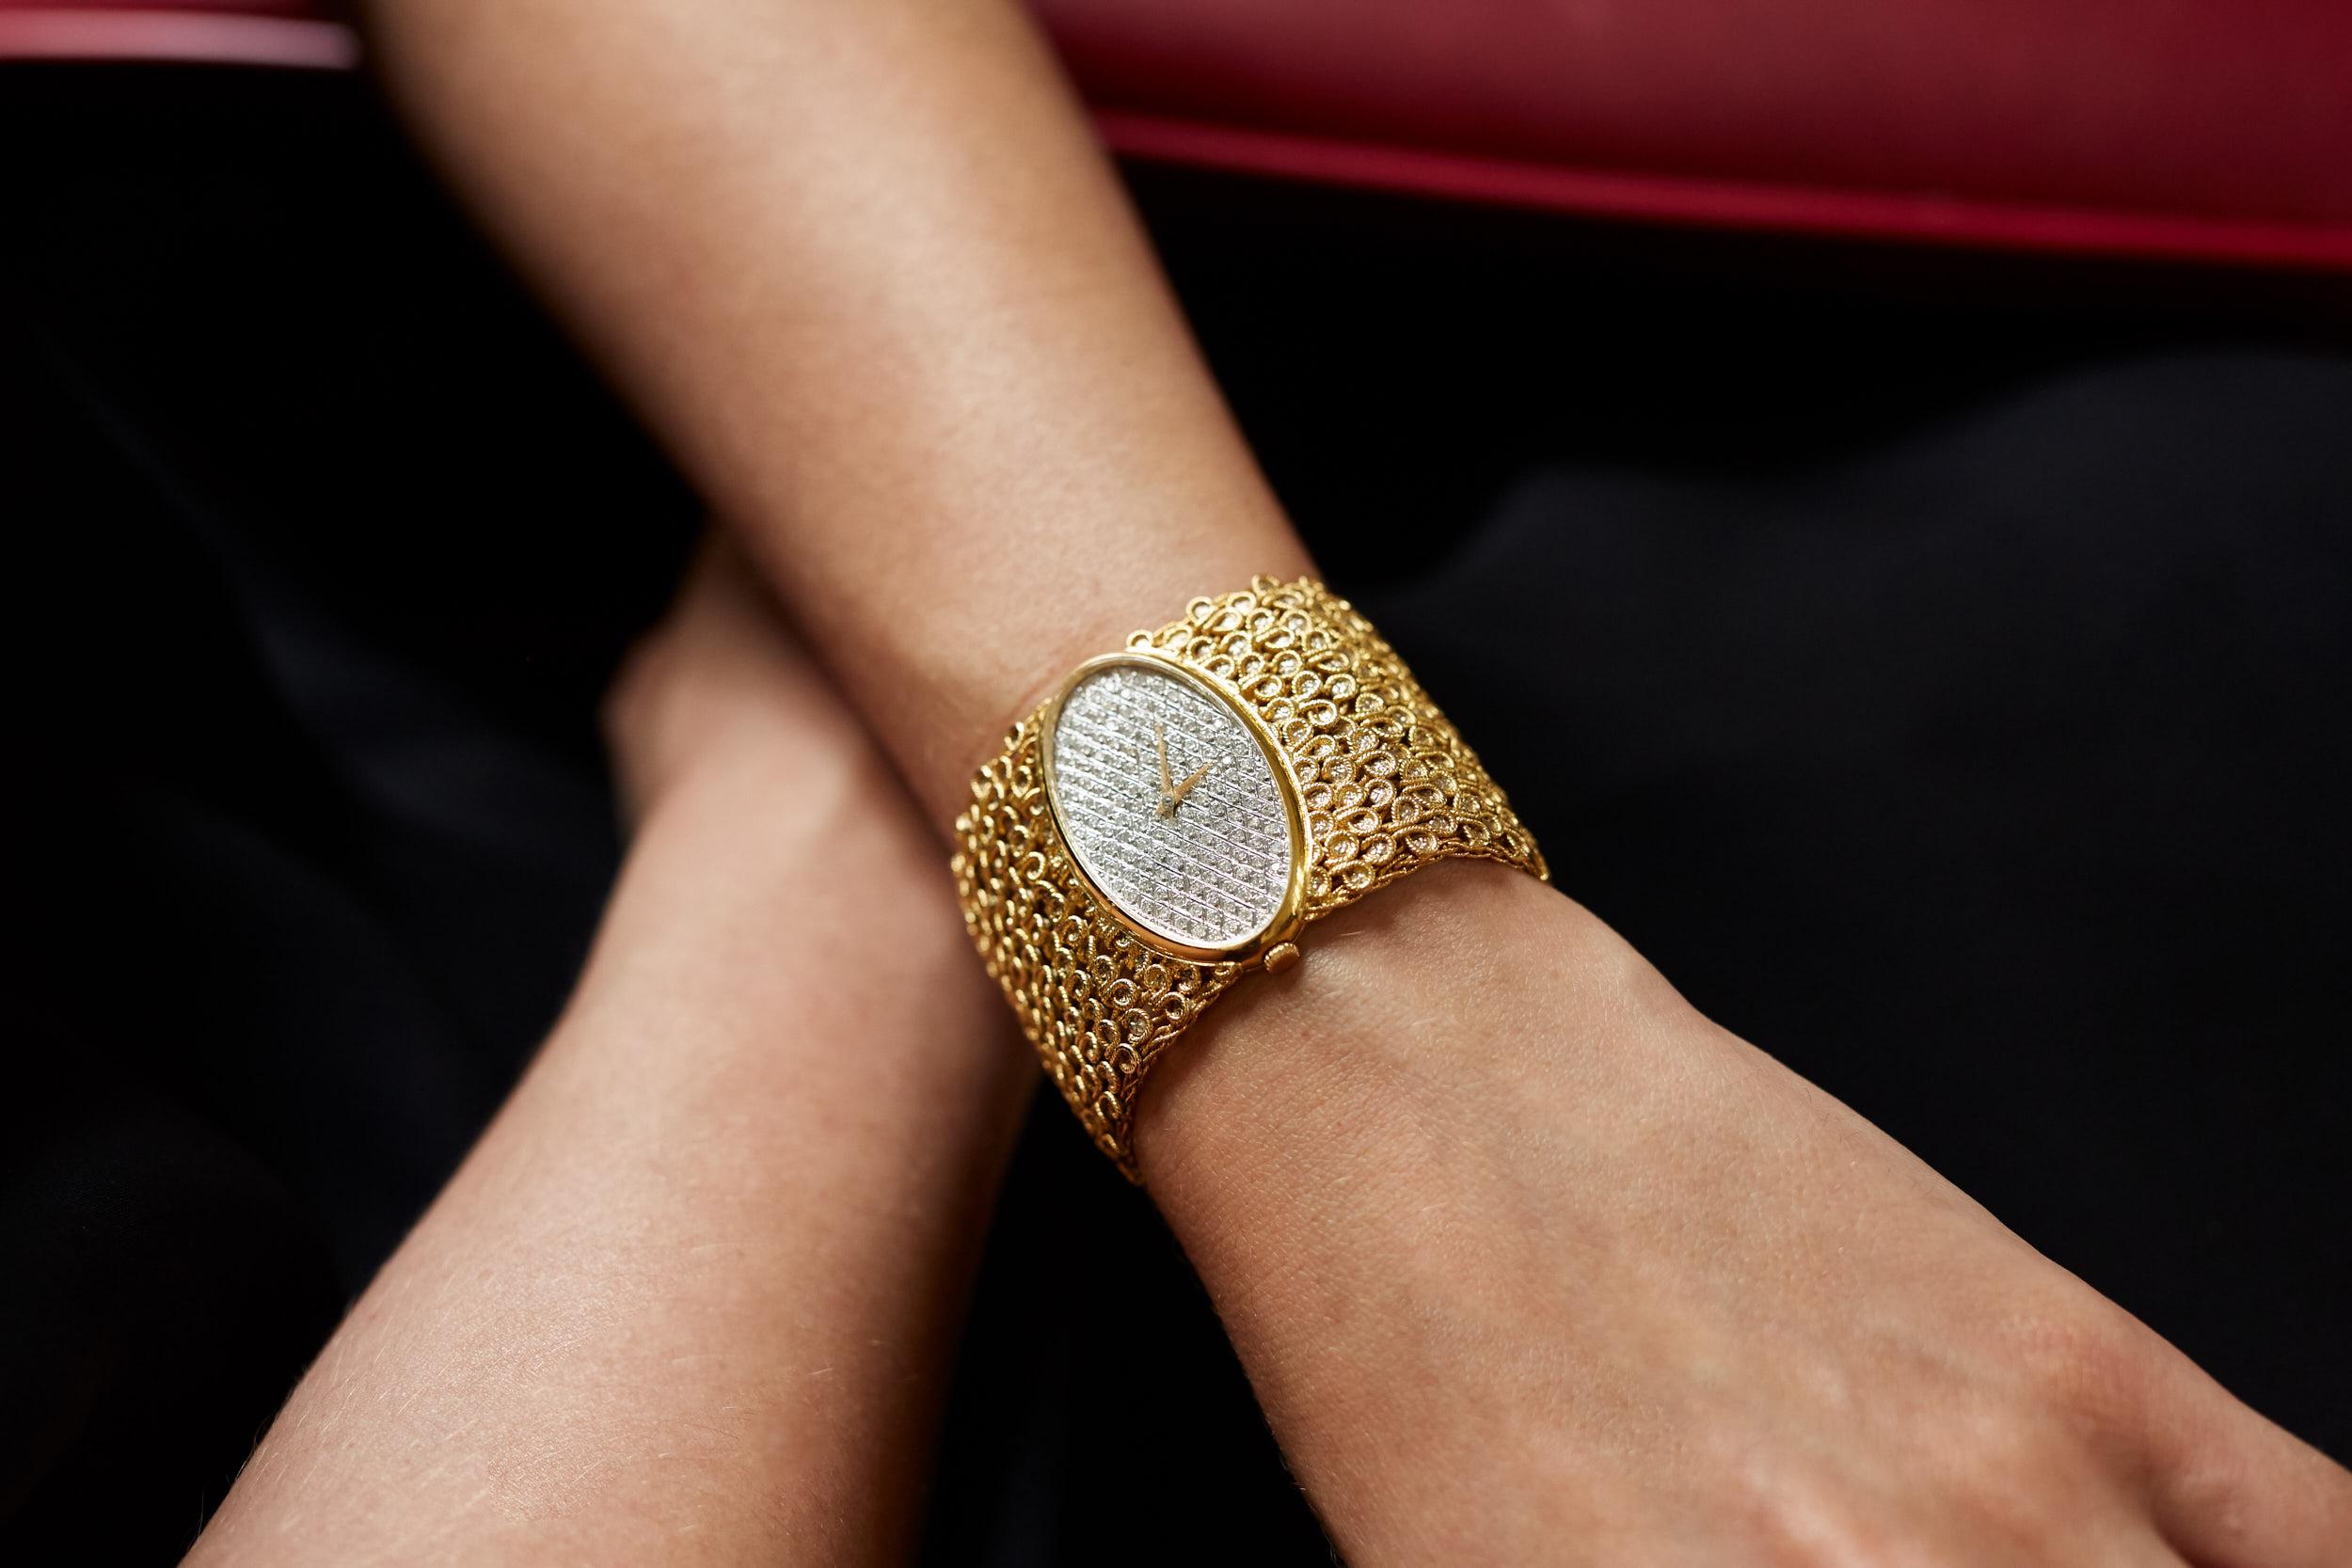 An elegant and eye-catching 18 karat yellow gold and pavé-set diamond wide bracelet watch, by Chopard, 1970s. Vintage jewelry. 
Pavé-set diamonds weighing approximately 1.45 carats total.
The watch has Swiss gold marks and is stamped LUC on the